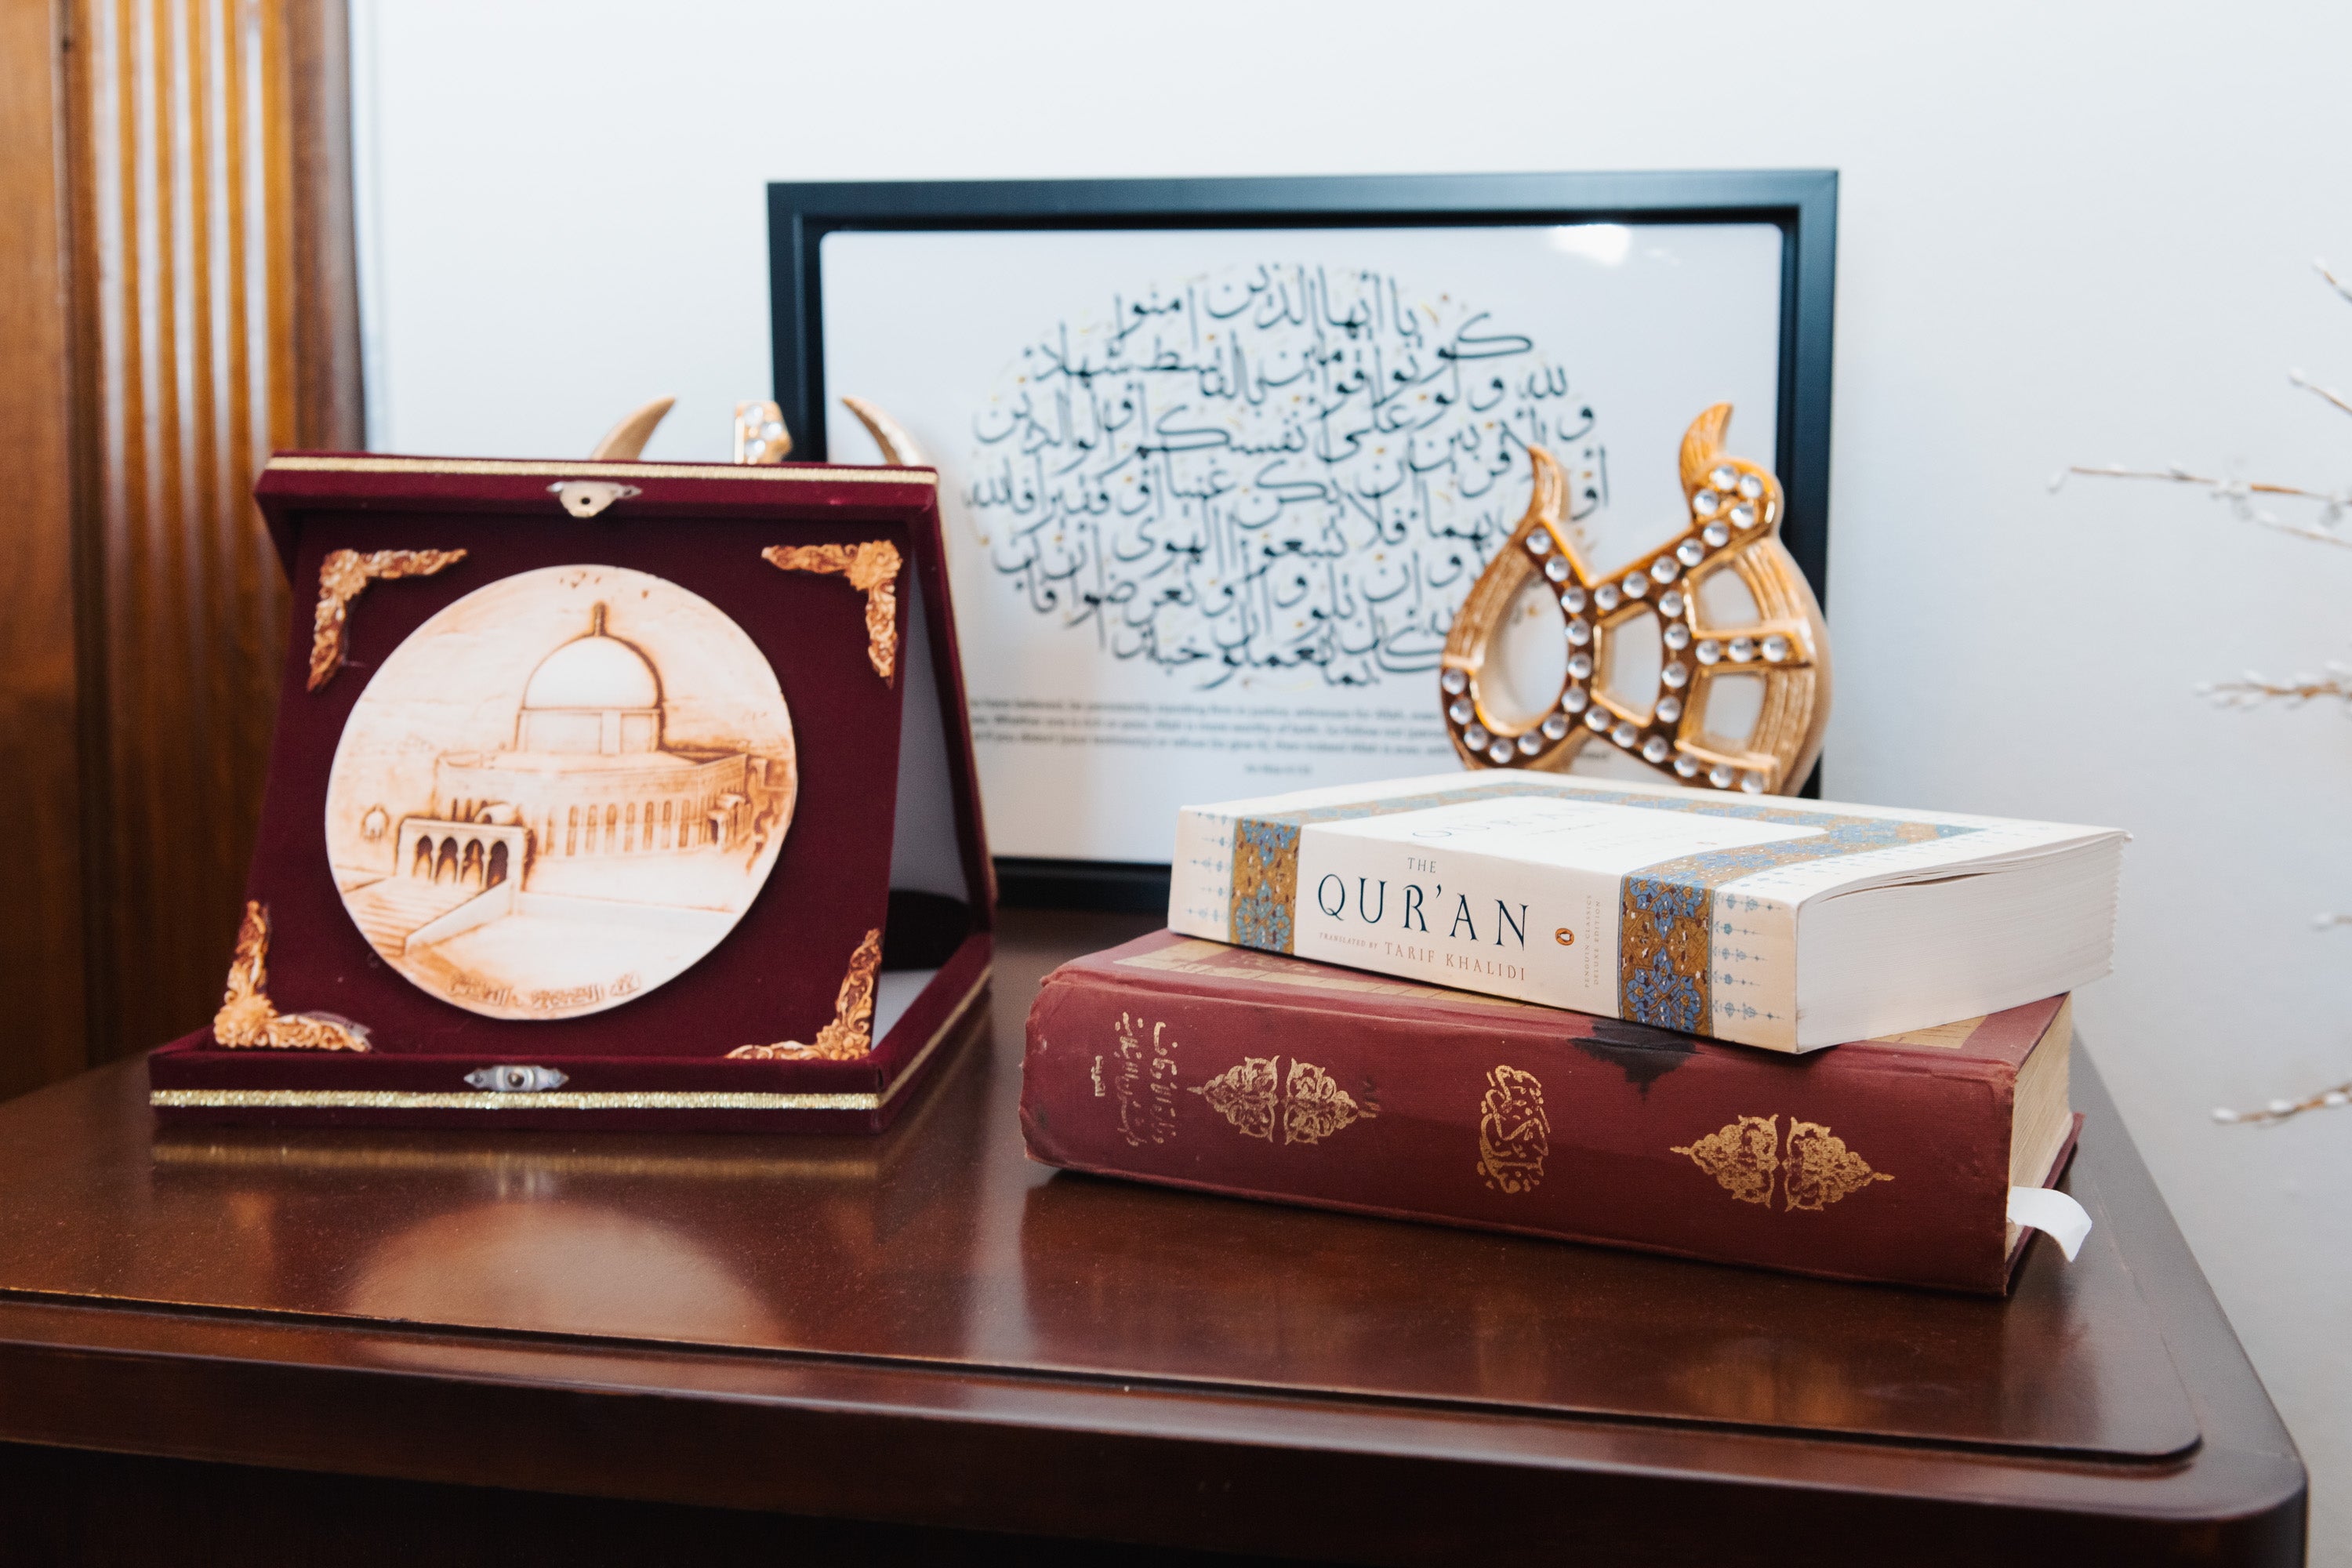 A quran and decoration inside Ilhan Omar's office.